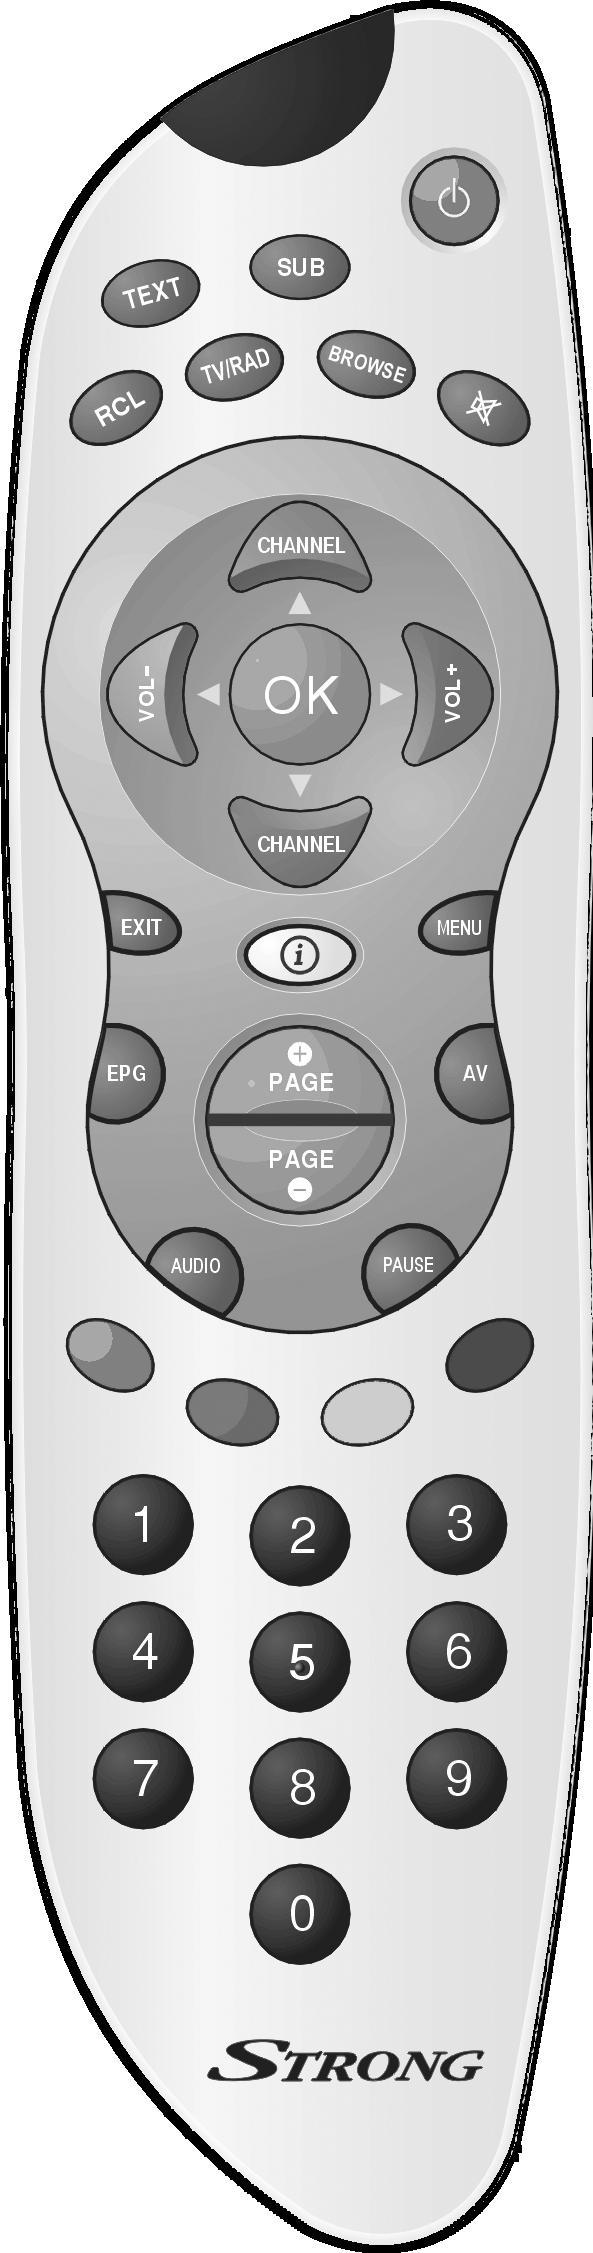 Remote Control Functions 1. POWER-STANDBY ON/OFF - Switches the Receiver in or out of Standby Mode 2. SUB - To select Captions Subtitles (when broadcast) 3. TEXT - Enables / Disables Teletext. 4.